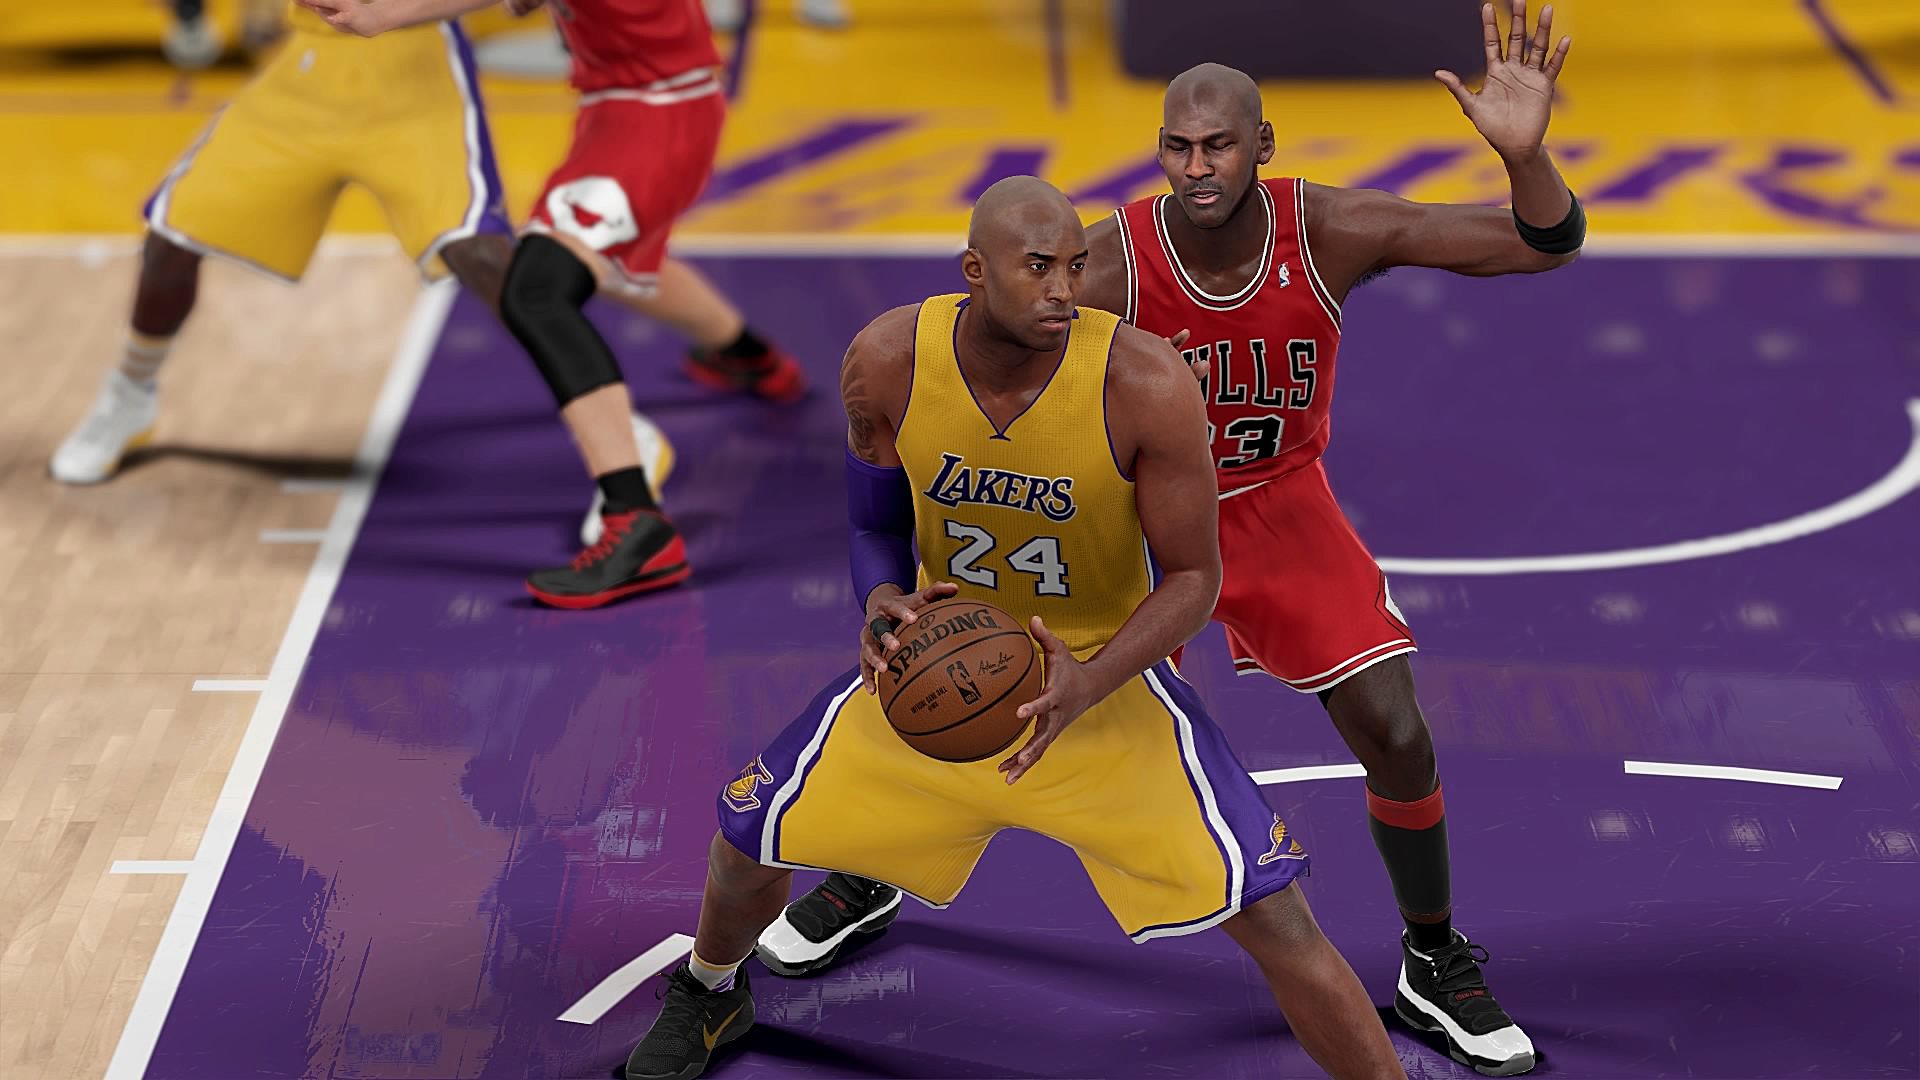 nba 2k17 pc update patches